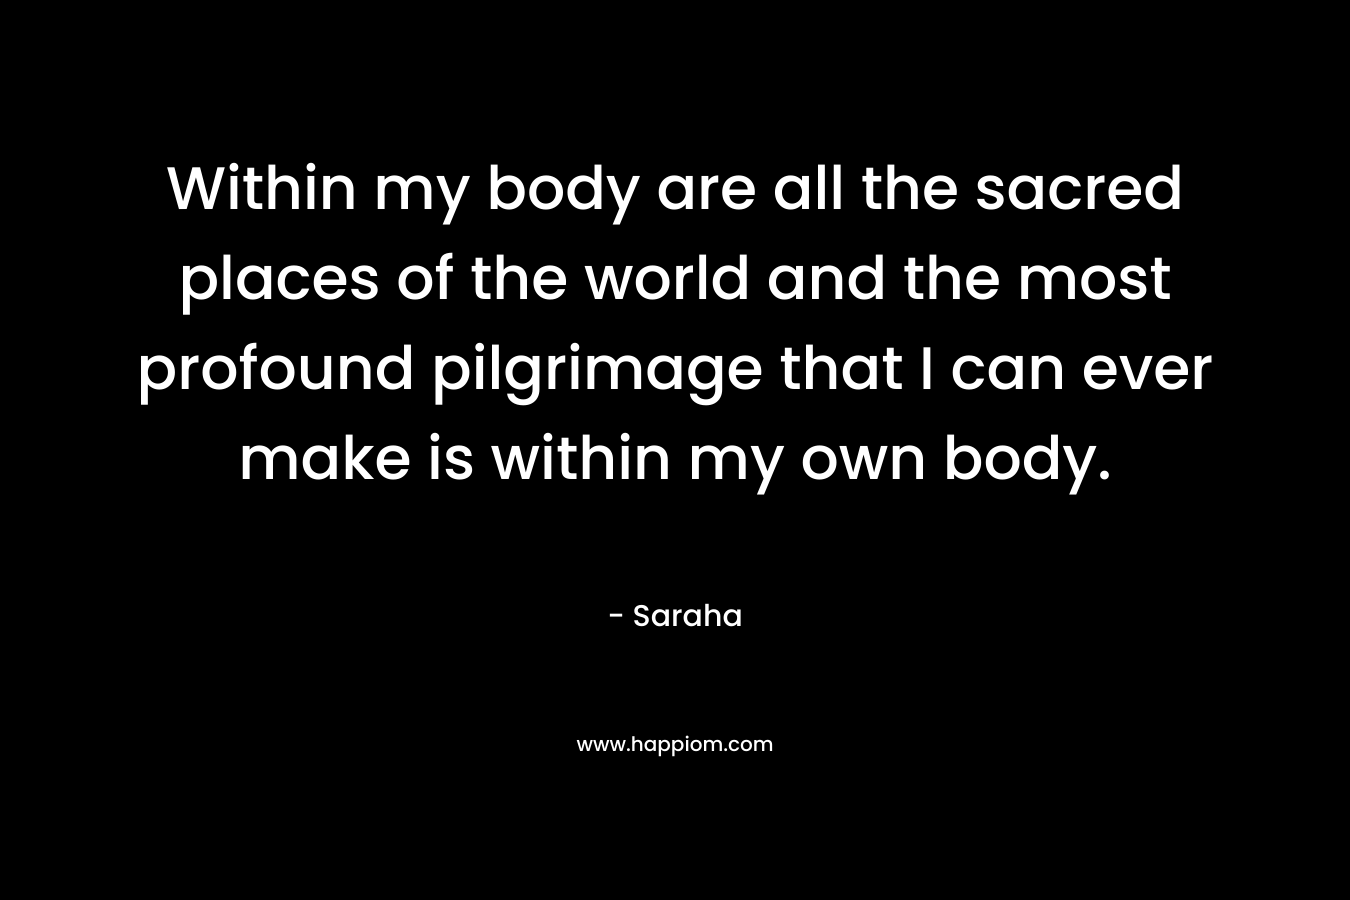 Within my body are all the sacred places of the world and the most profound pilgrimage that I can ever make is within my own body.